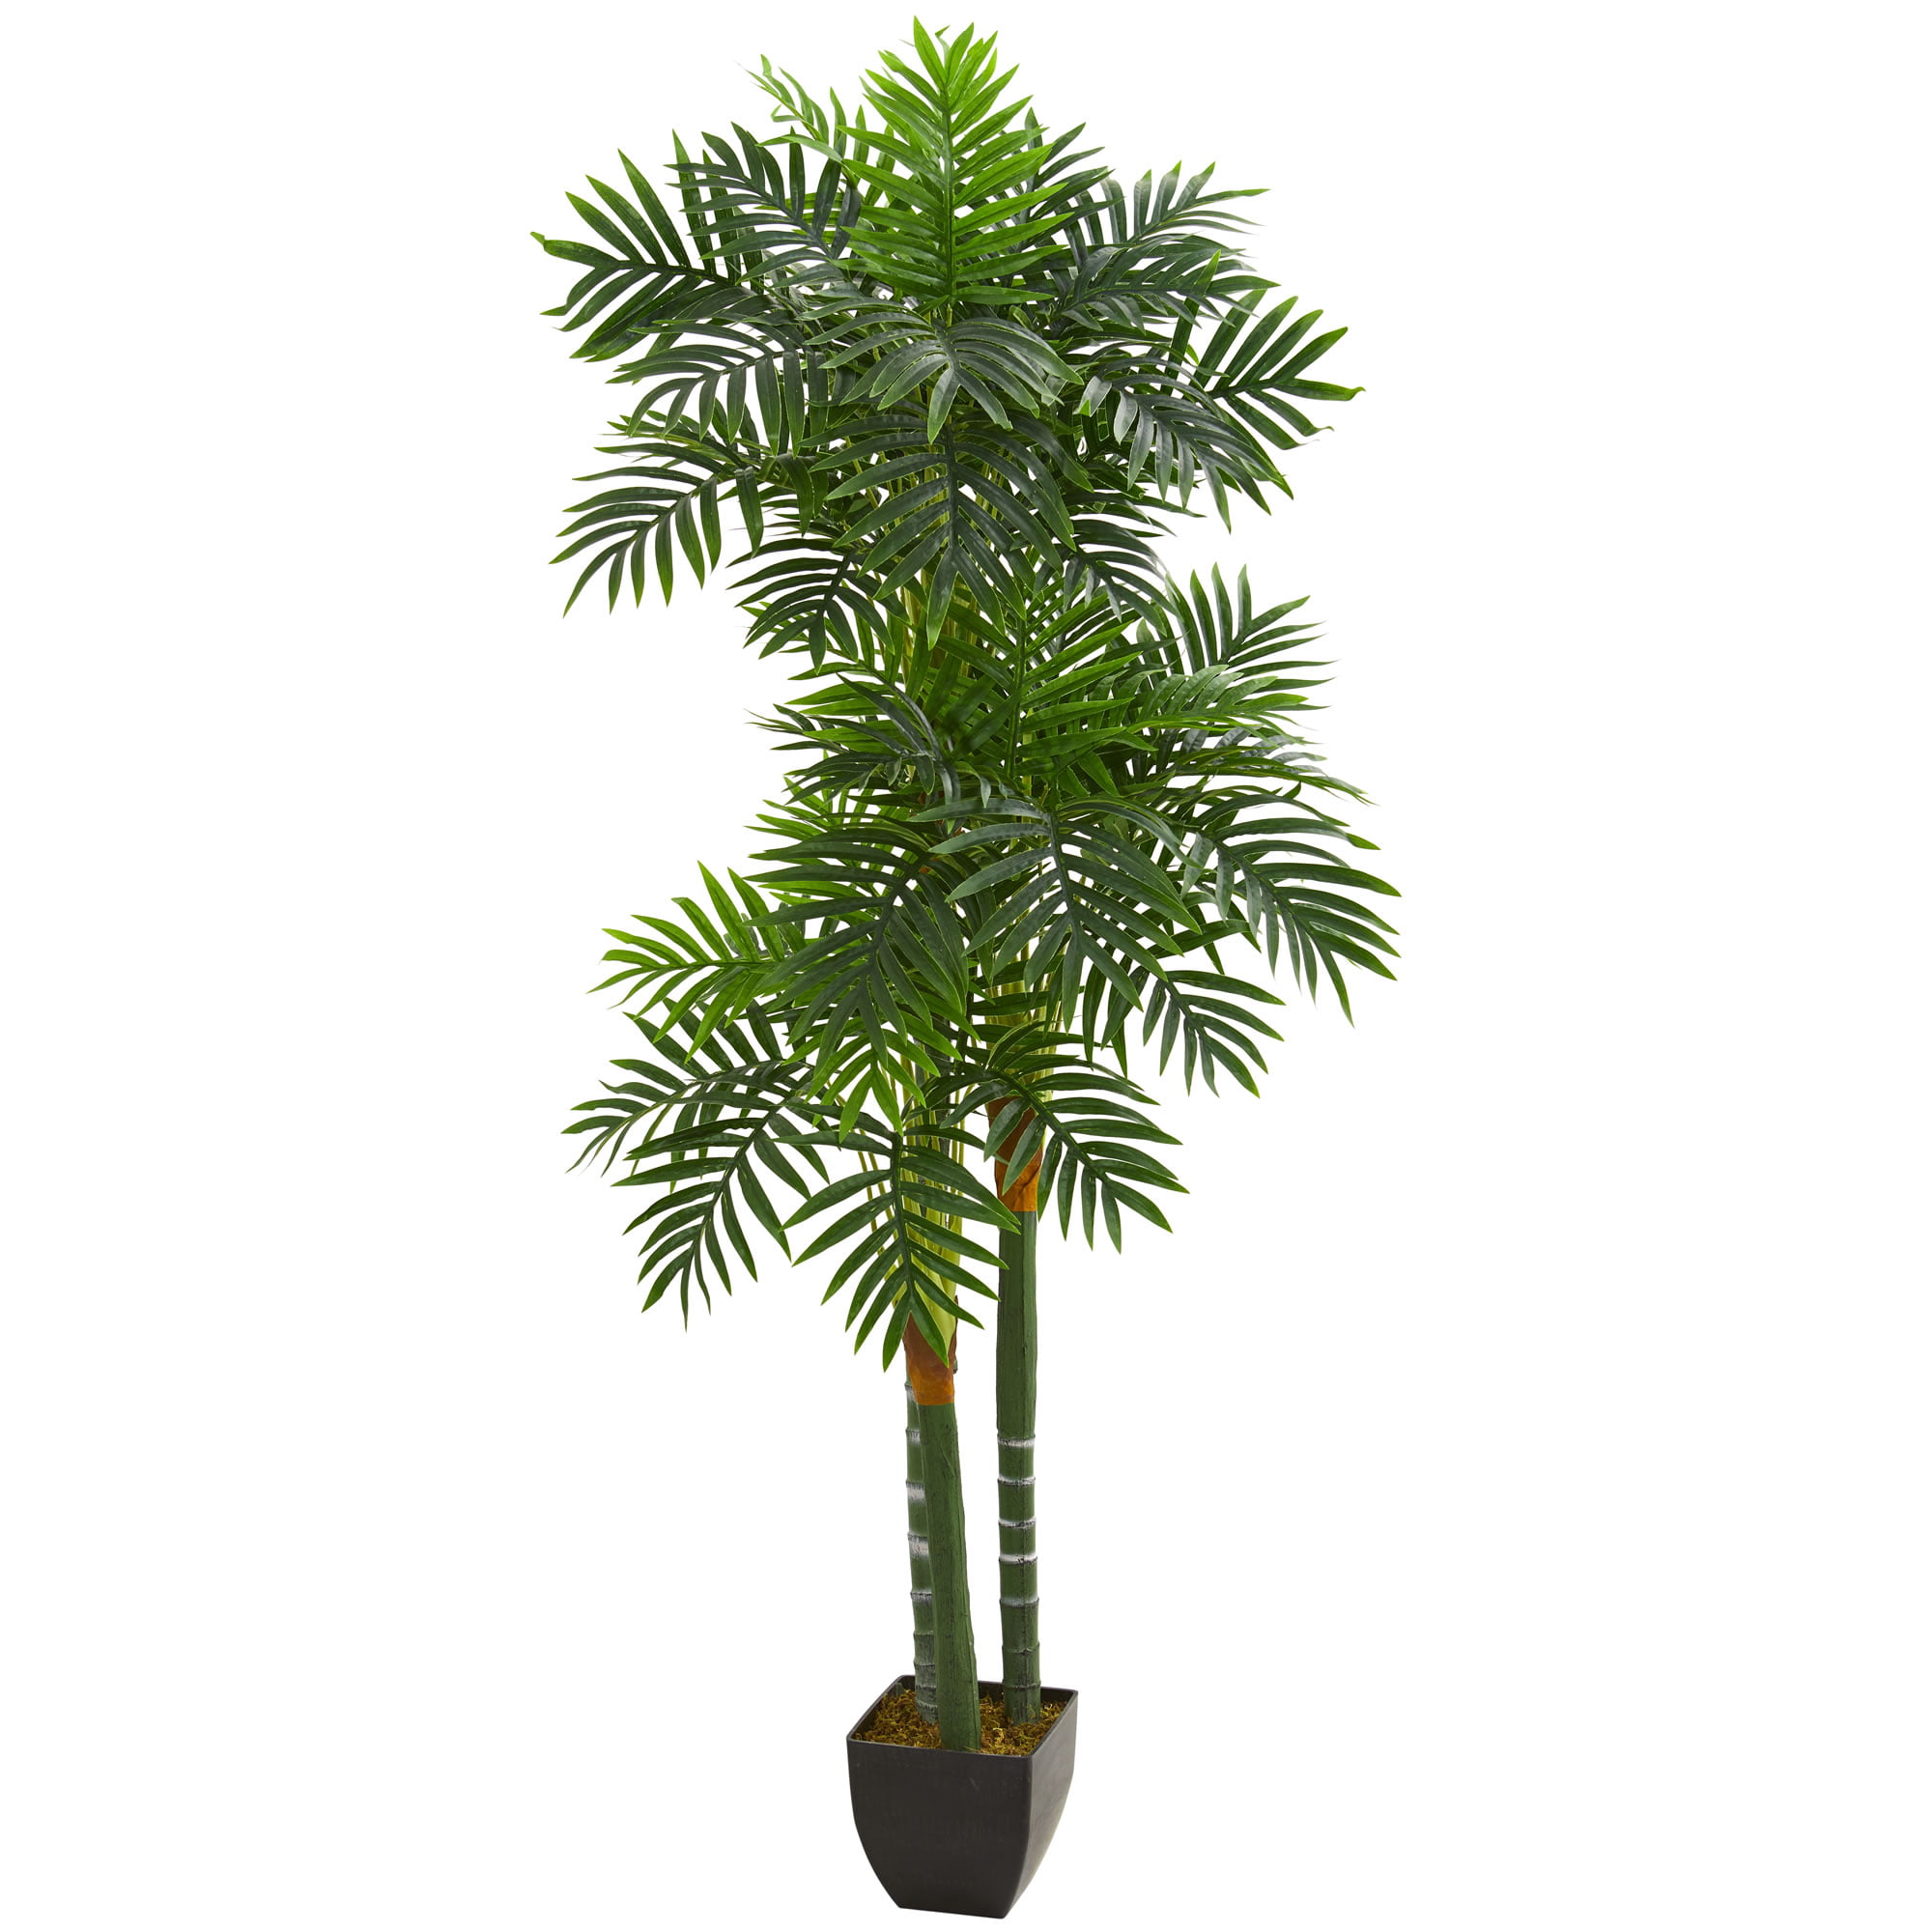 Details about   Artificial Plant 4 ft Areca Palm Tree Real Touch Feel with Plastic Container 